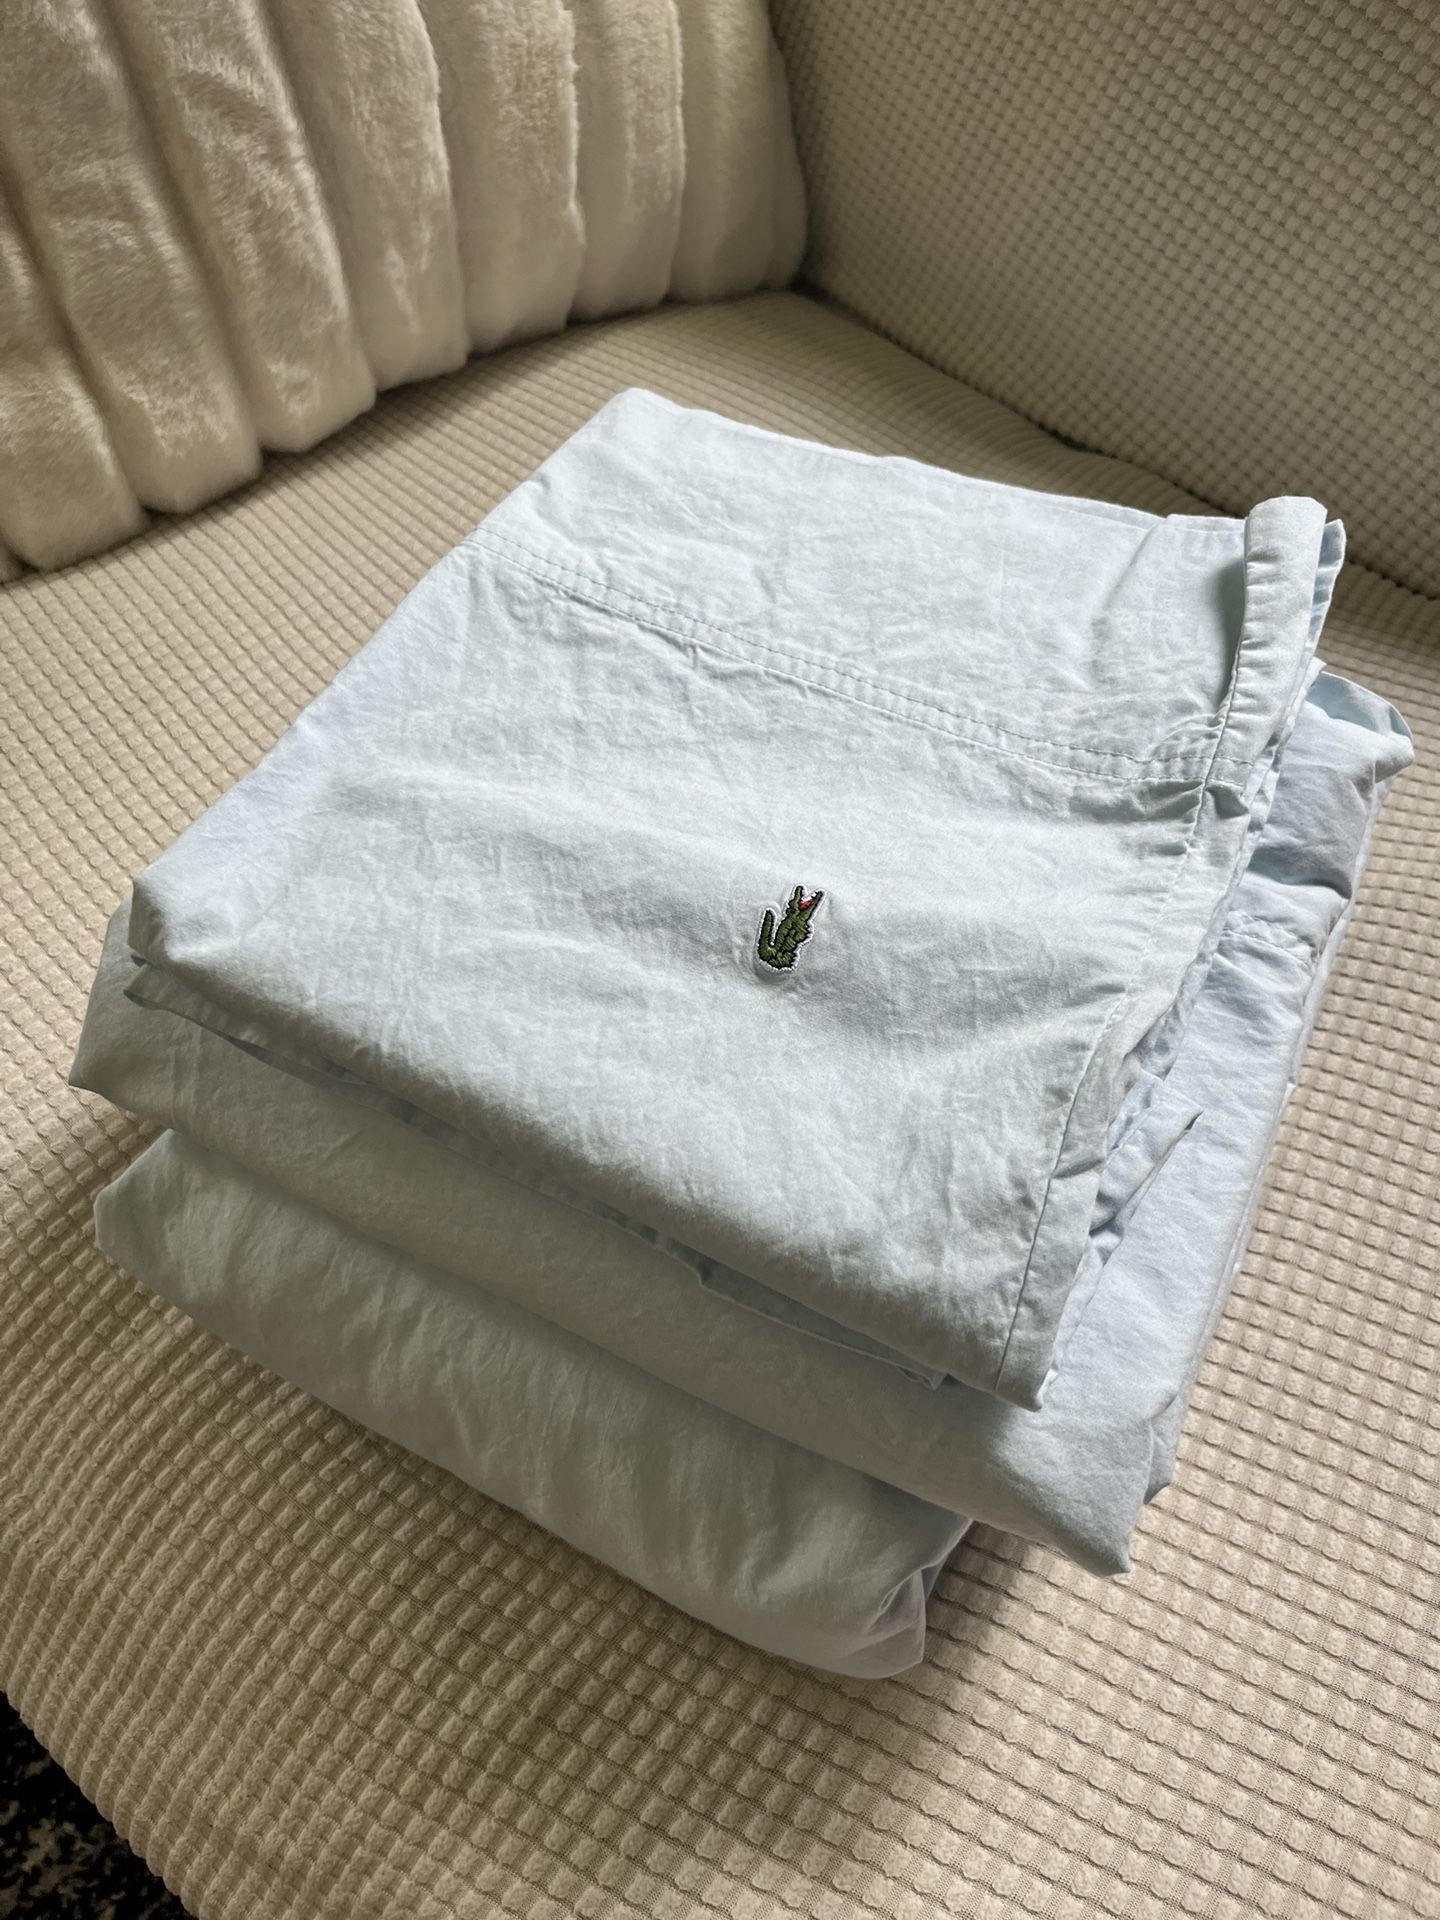 Queen Sheets, Lacoste, One Hundred Percent Cotton, Cotton, Queen Size, Blue 